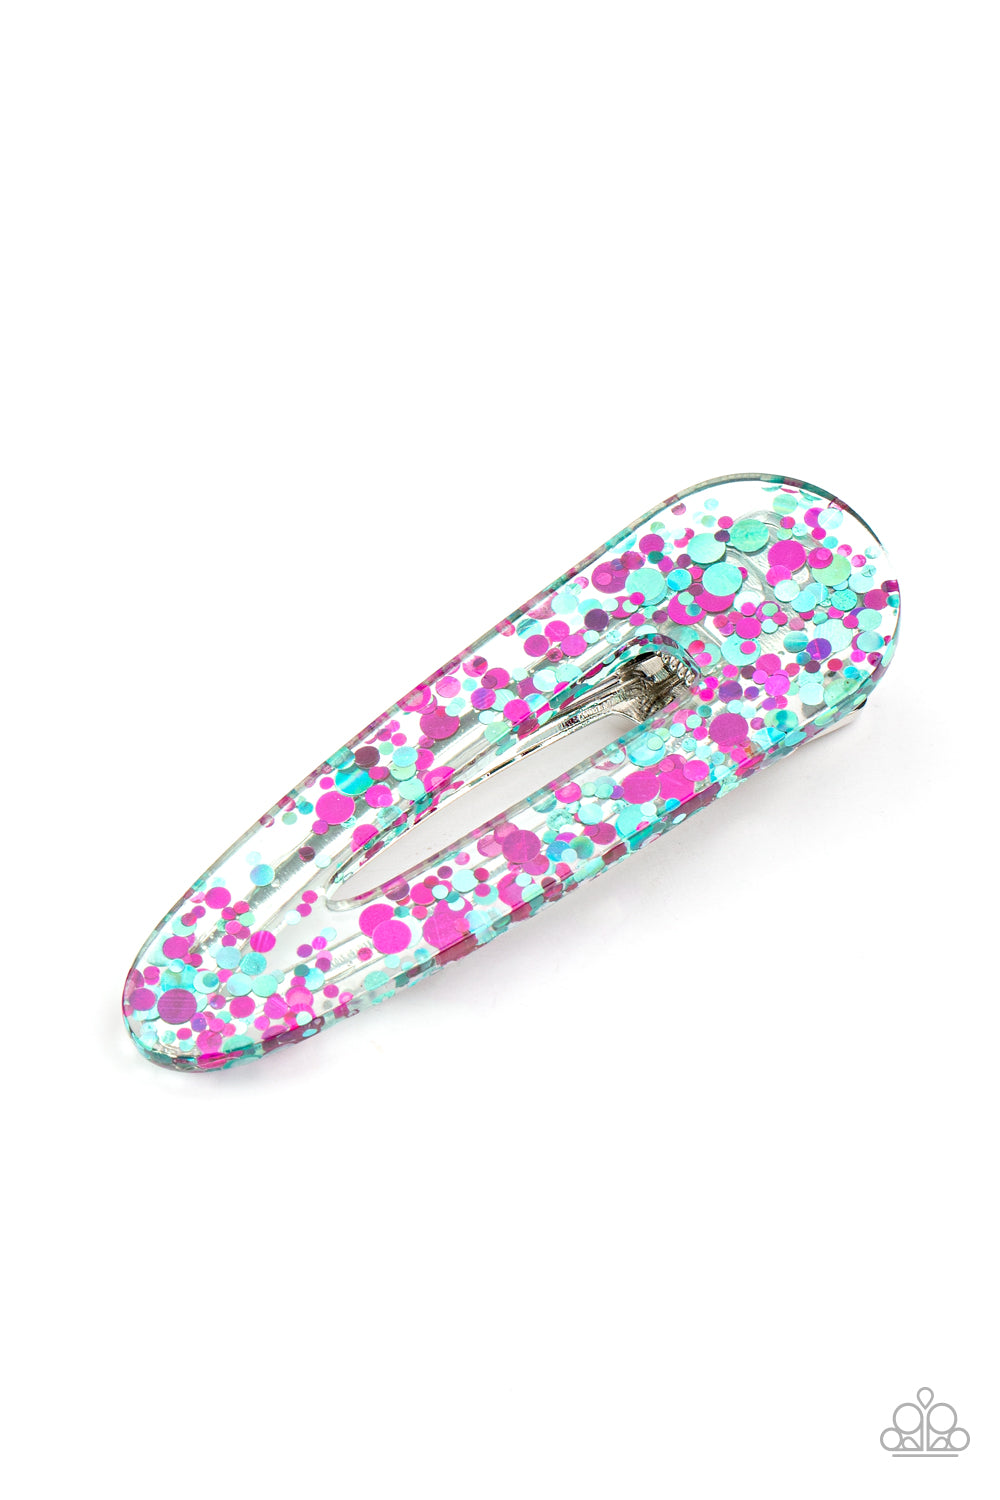 Wish Upon a Sequin Pink Hair Clip - Paparazzi Accessories  A glittery collection of pink and blue sequins sparkle inside a clear acrylic frame, creating a glitzy display. Features a standard hair clip on the back.  Sold as one individual hair clip.